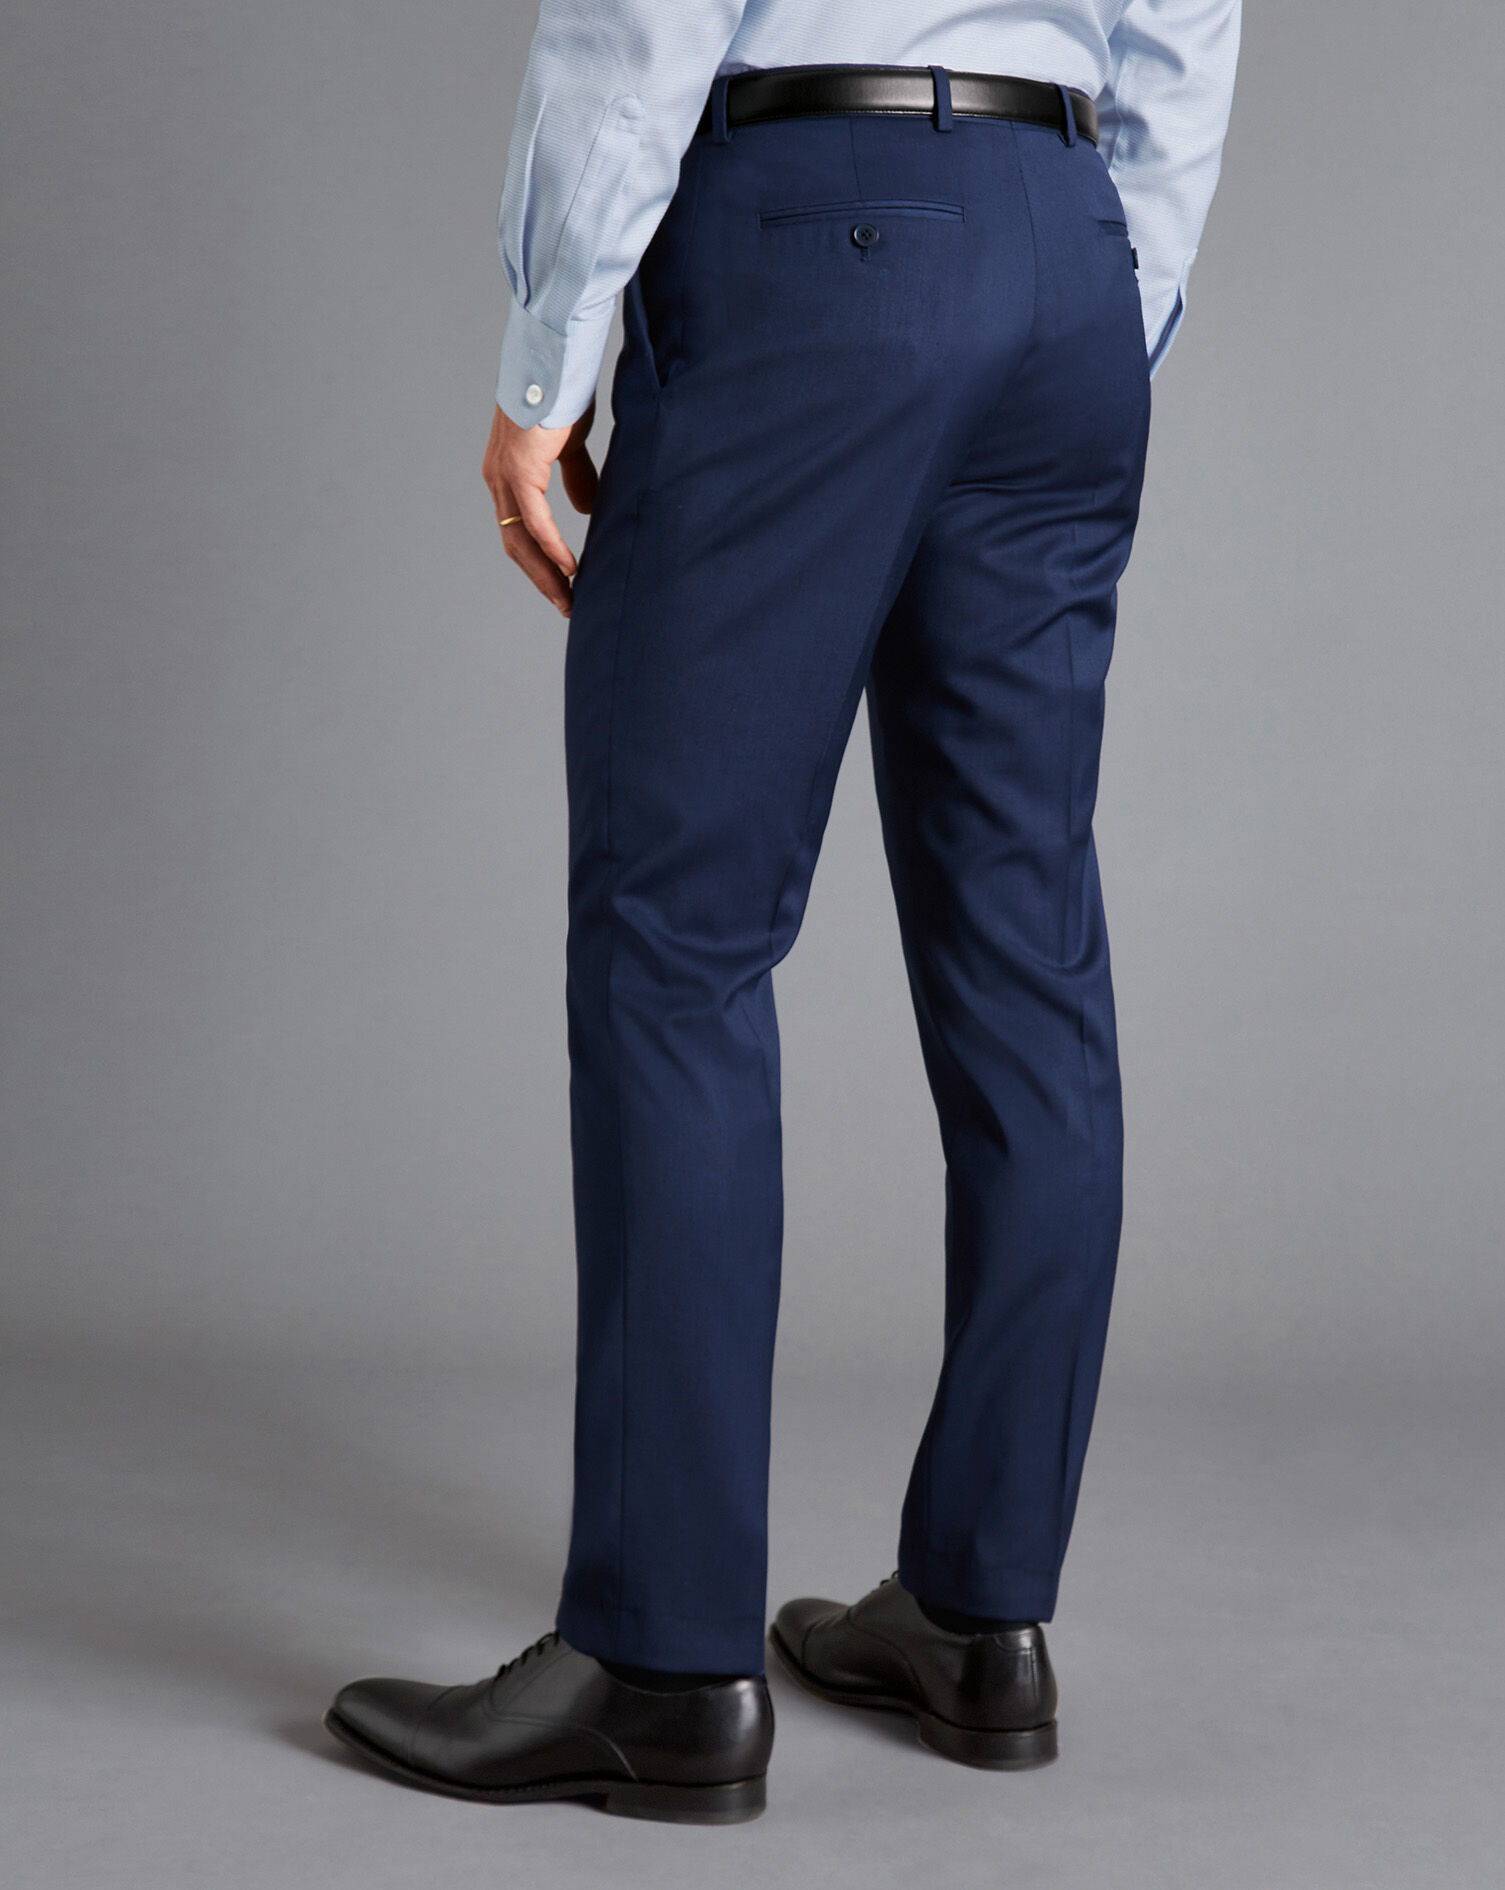 TEXTURED SUIT TROUSERS  Sky blue  ZARA India